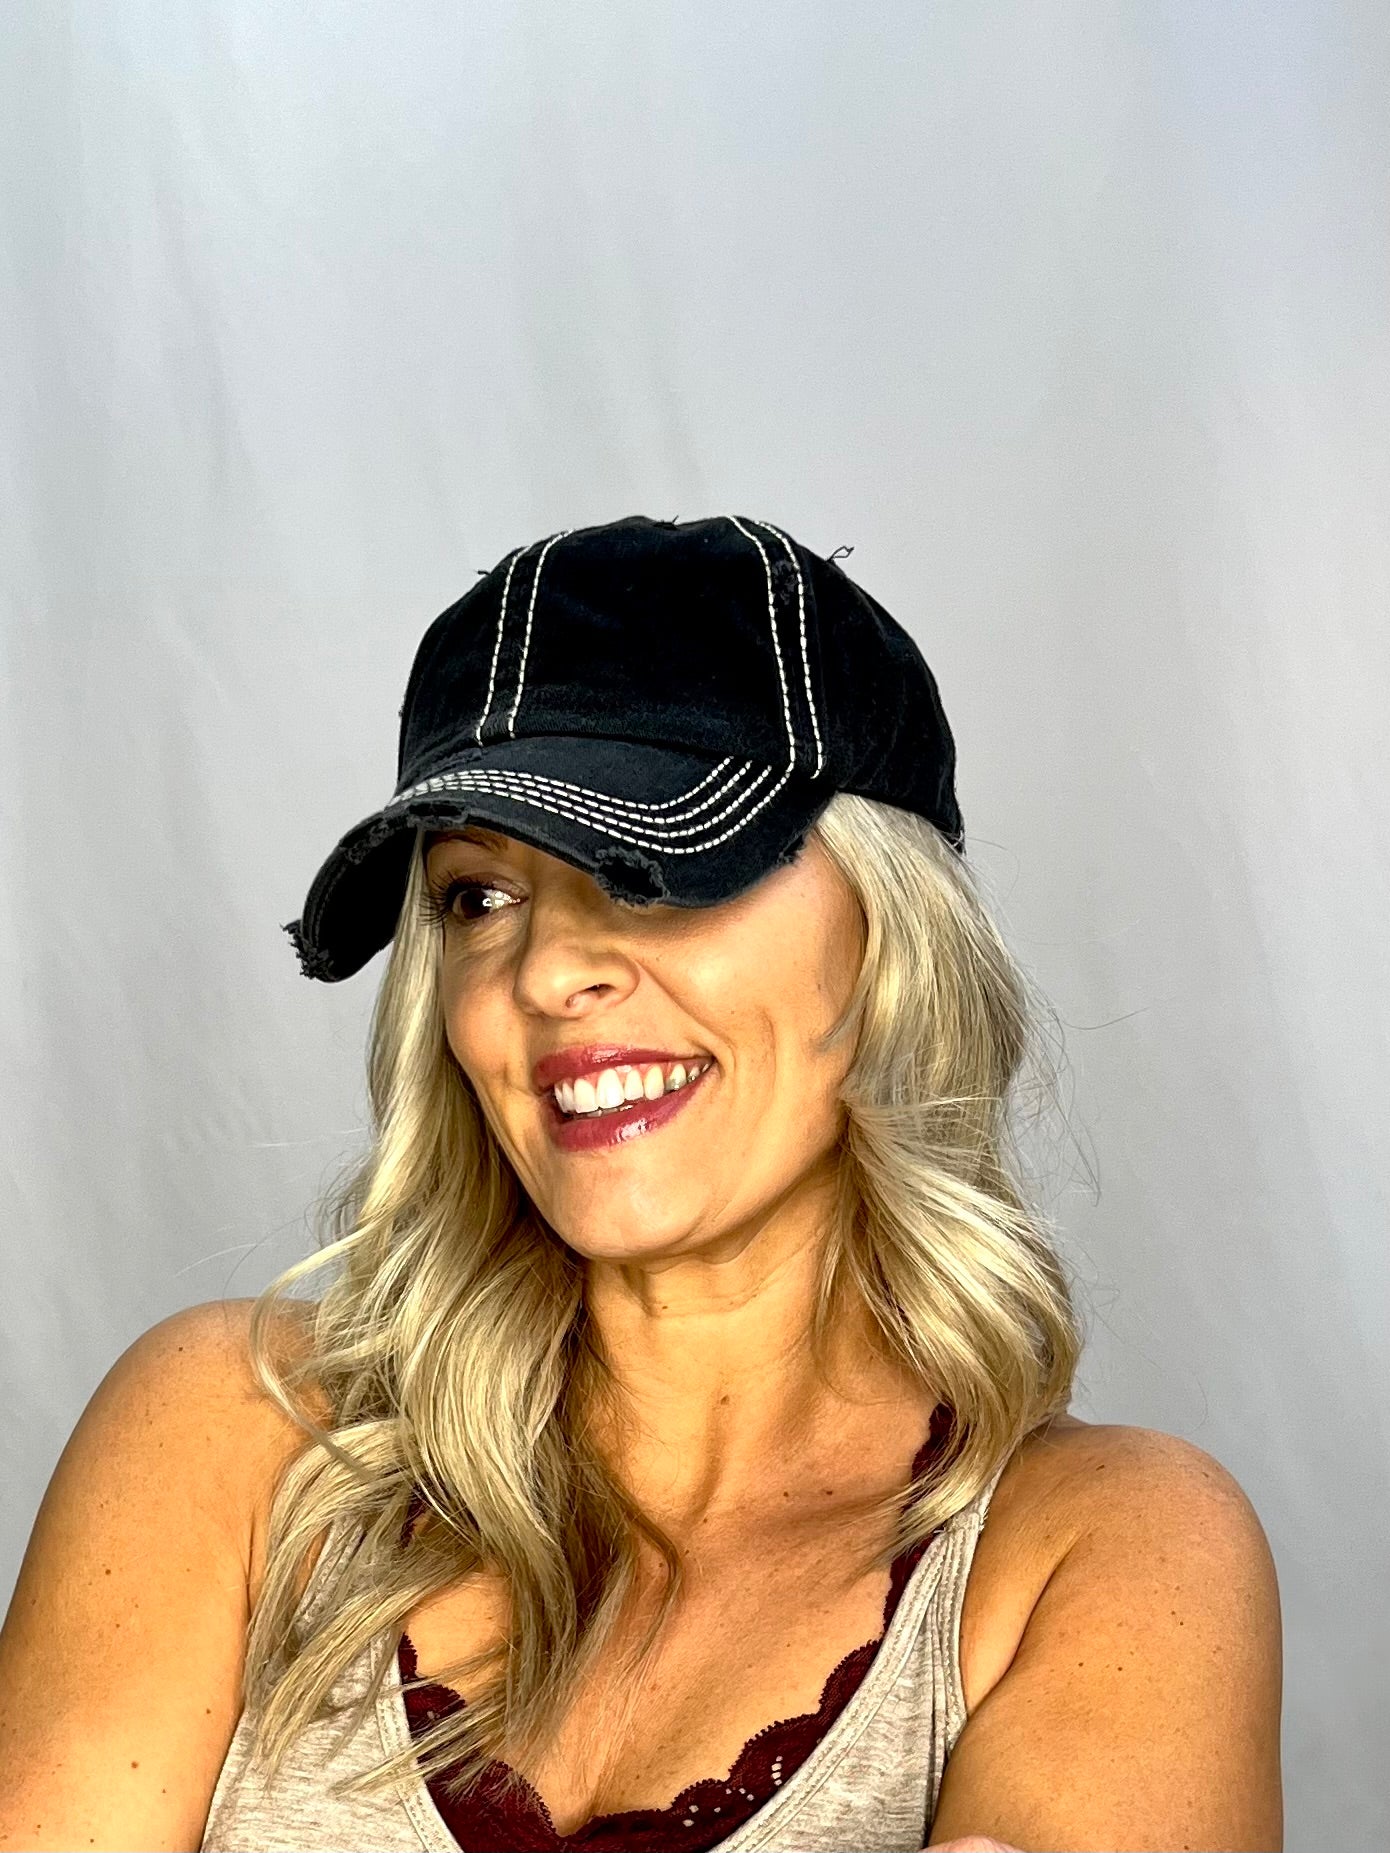 Vintage Distressed Baseball Hat in Black with White Stitching, Black